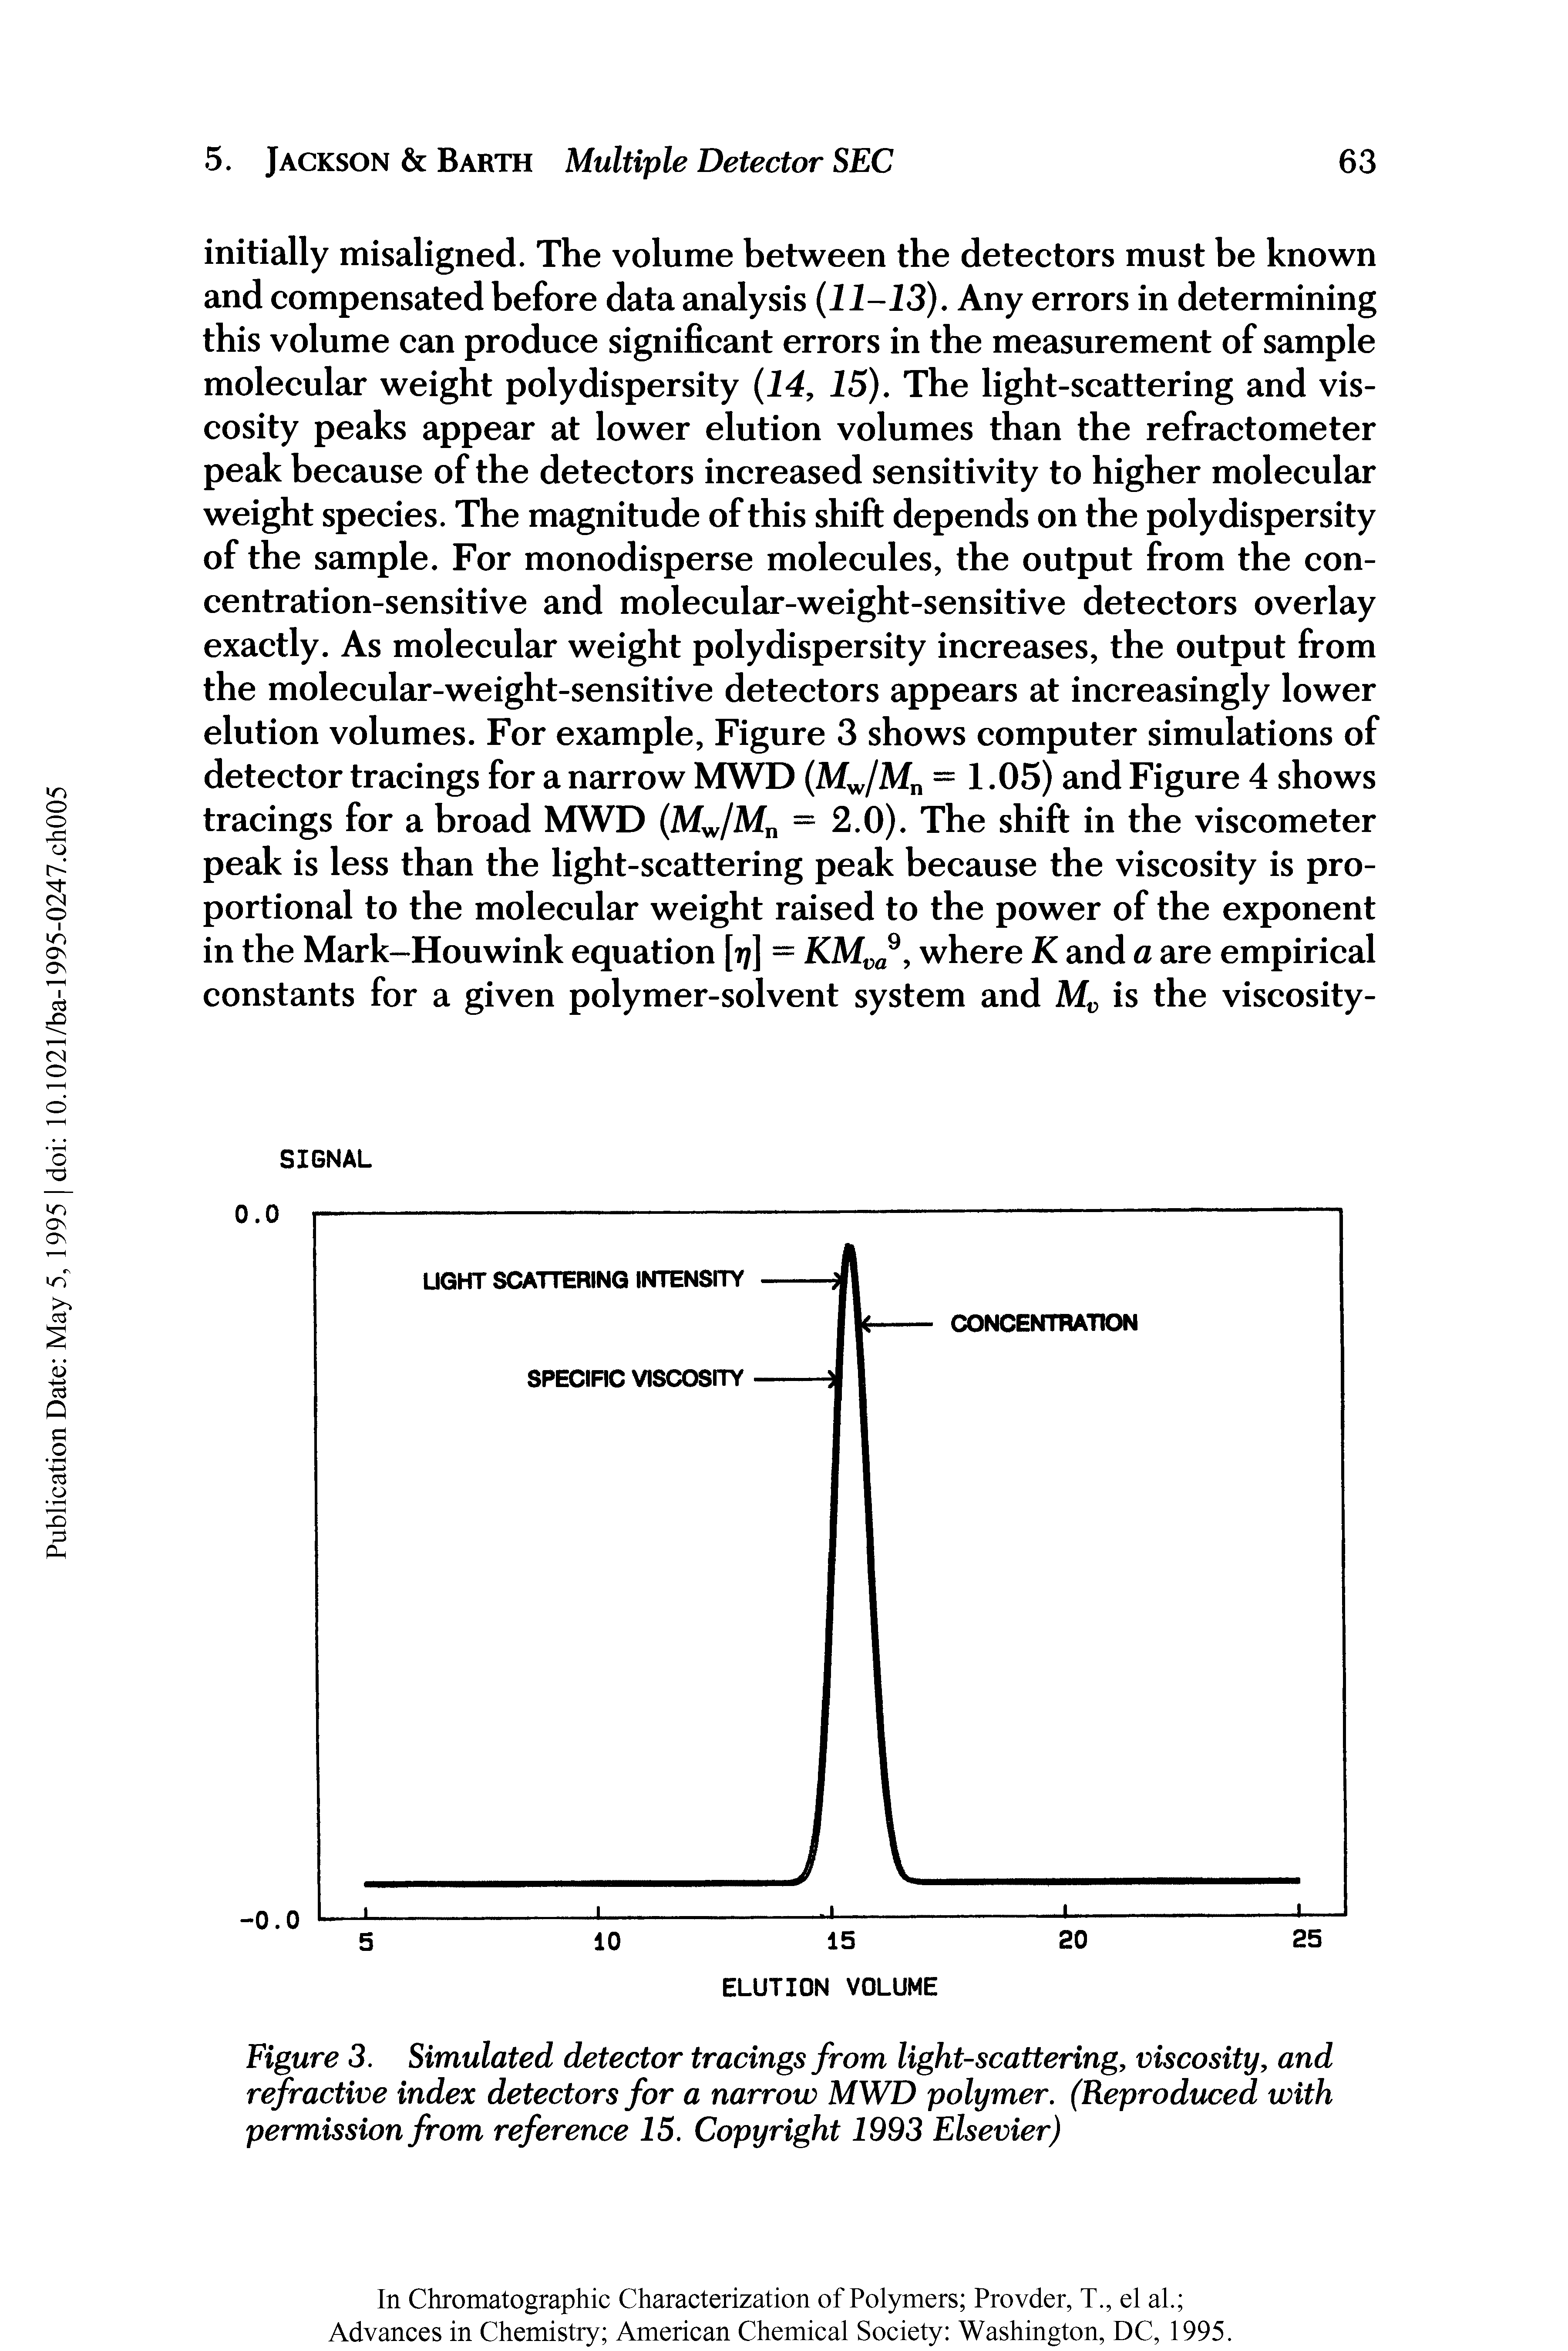 Figure 3. Simulated detector tracings from light-scattering, viscosity, and refractive index detectors for a narrow MWD polymer. (Reproduced with permission from reference 15. Copyright 1993 Elsevier)...